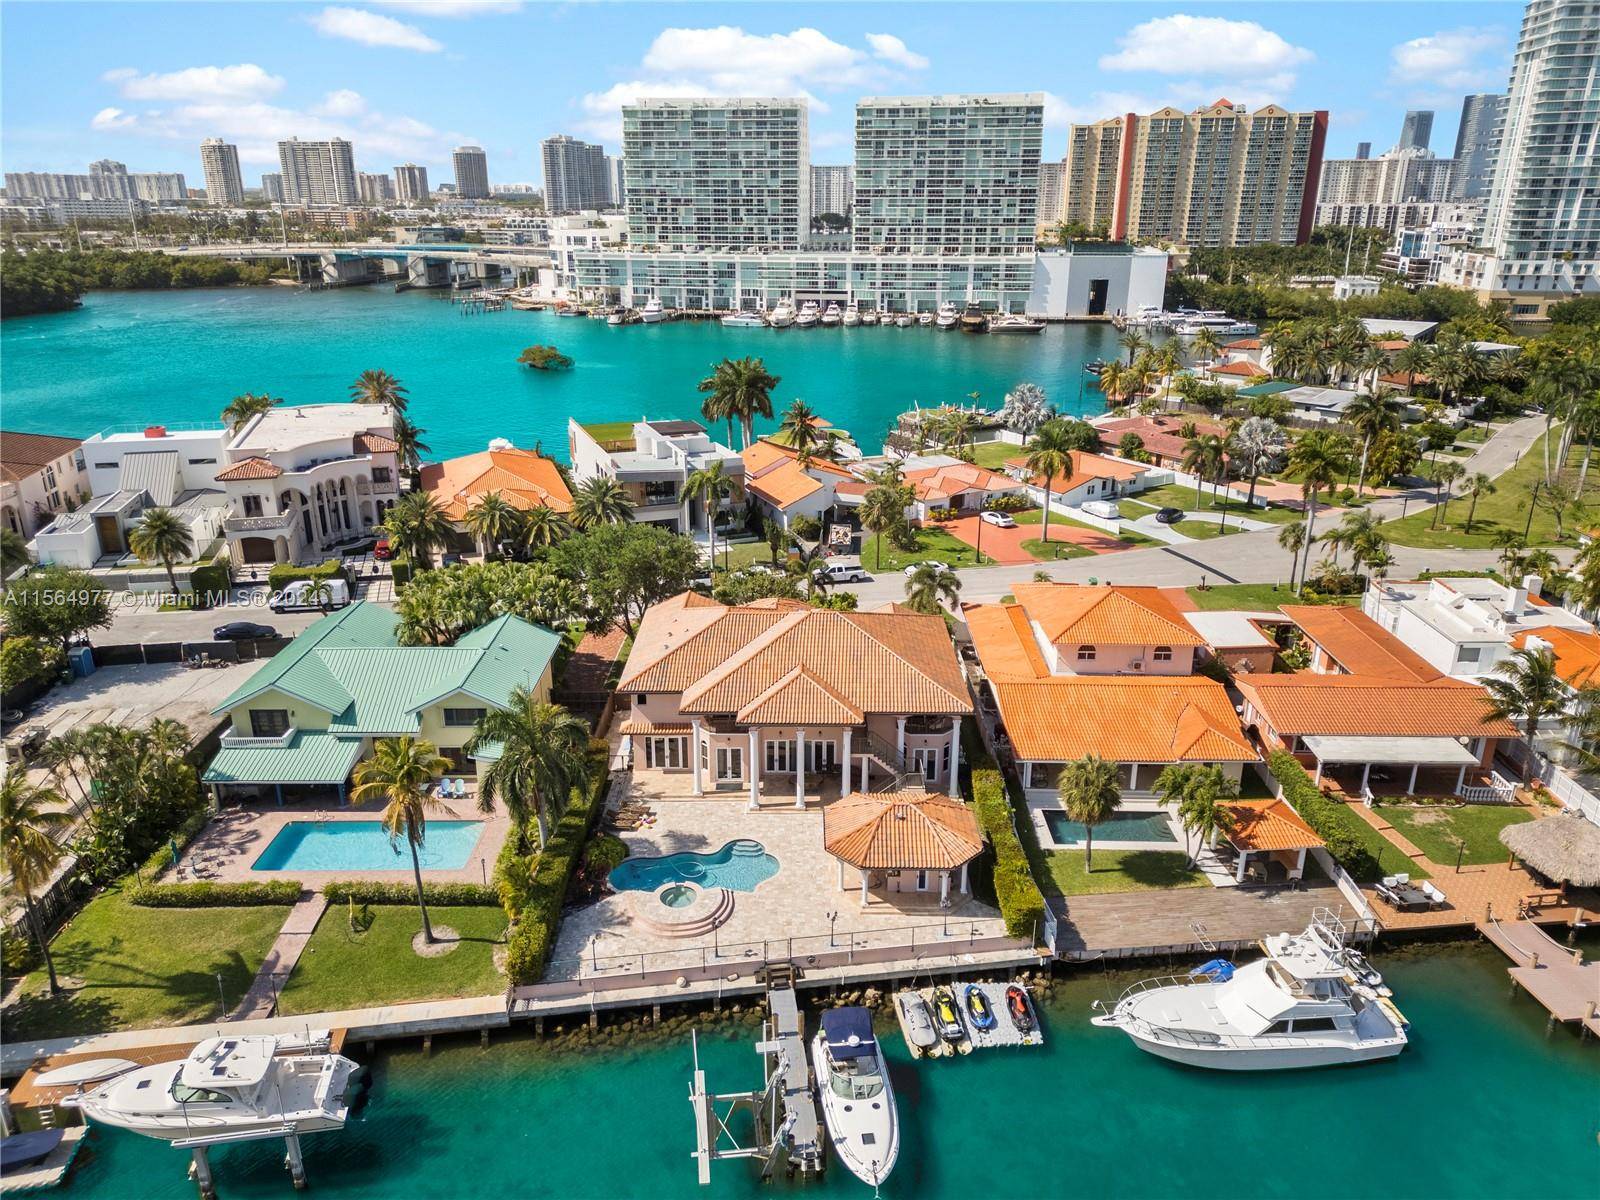 Exquisite Mediterranean waterfront home on Atlantic Isle, a secluded gem nestled between the luxury shopping destinations of Aventura and Bal Harbour.